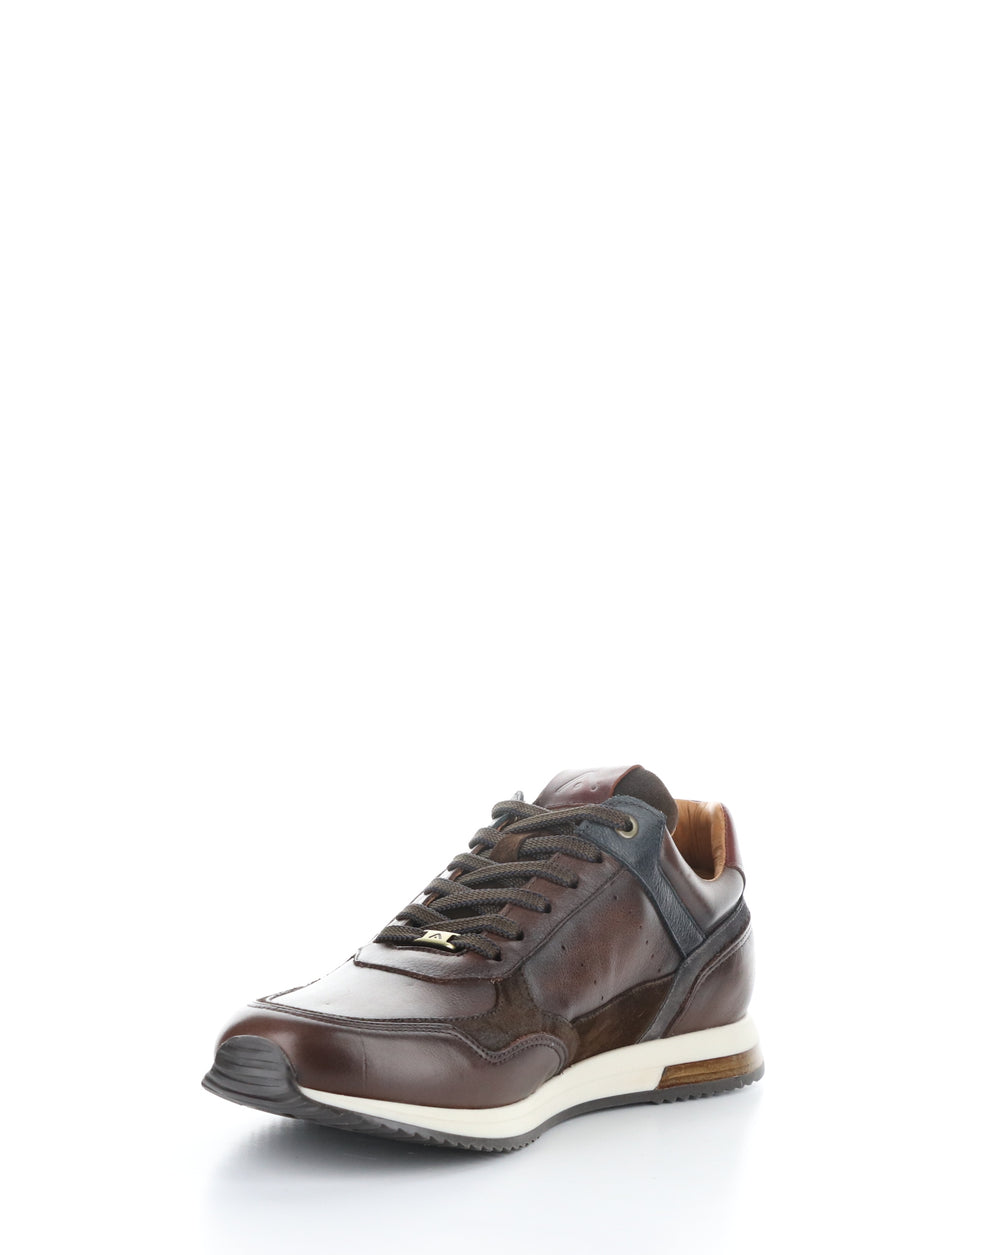 13052 BROWN COMBI Lace-up Shoes